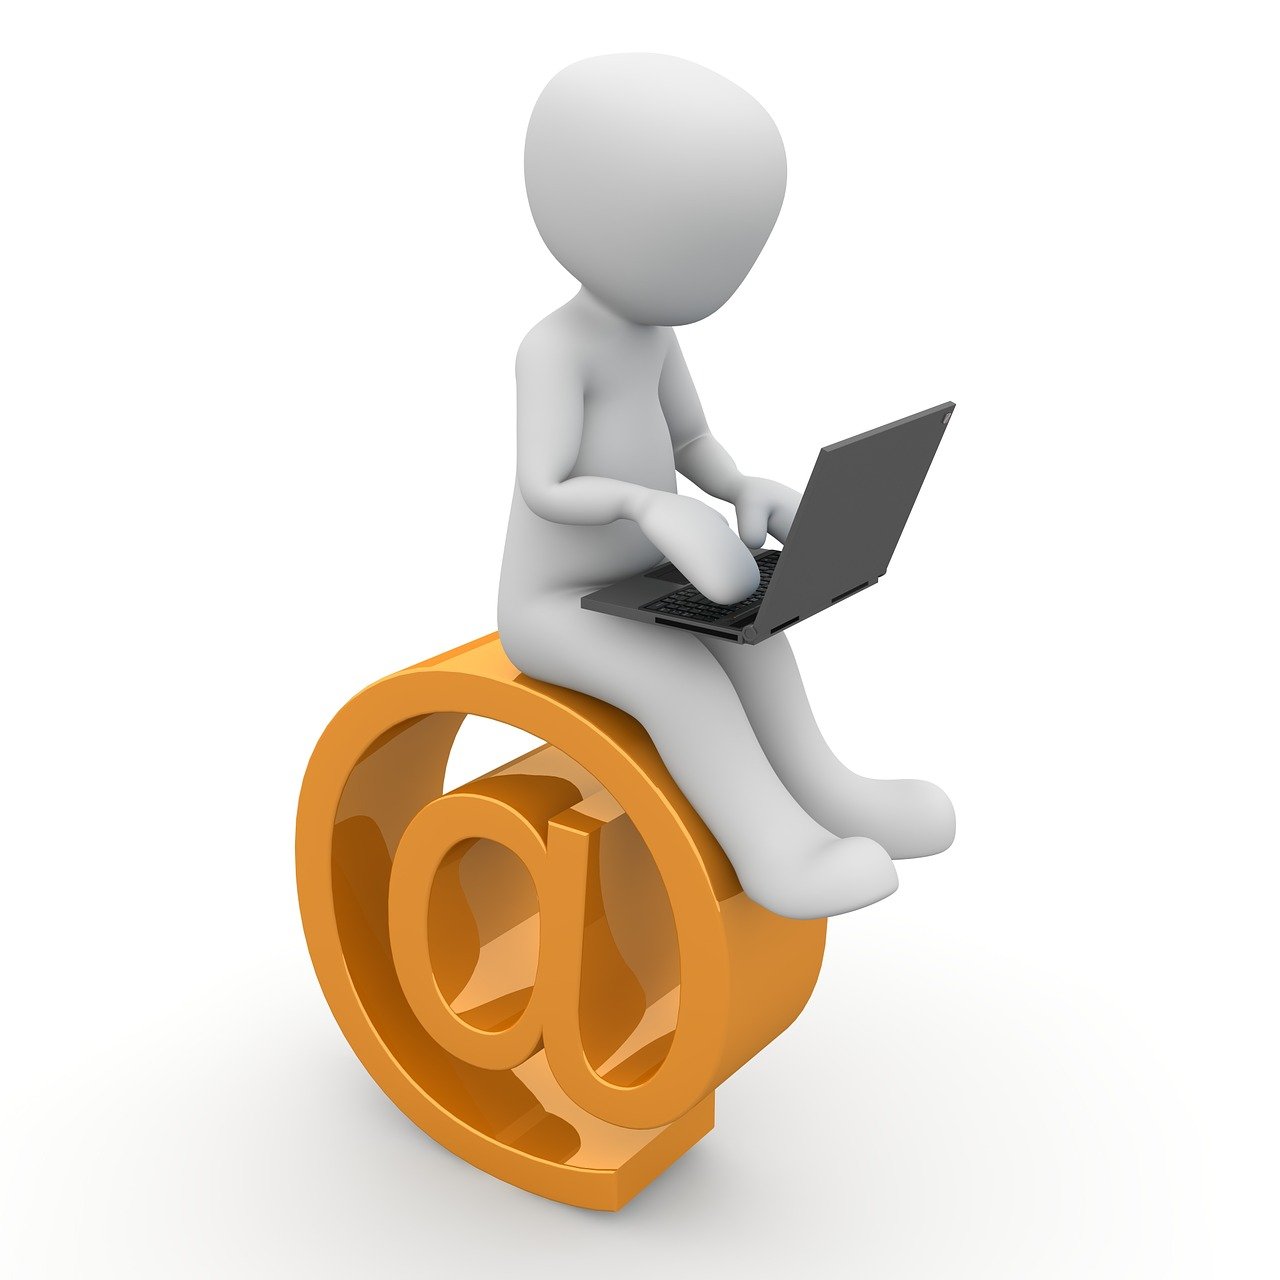 a person sitting on an email symbol with a laptop, a picture, funny, cad, sitting, how to